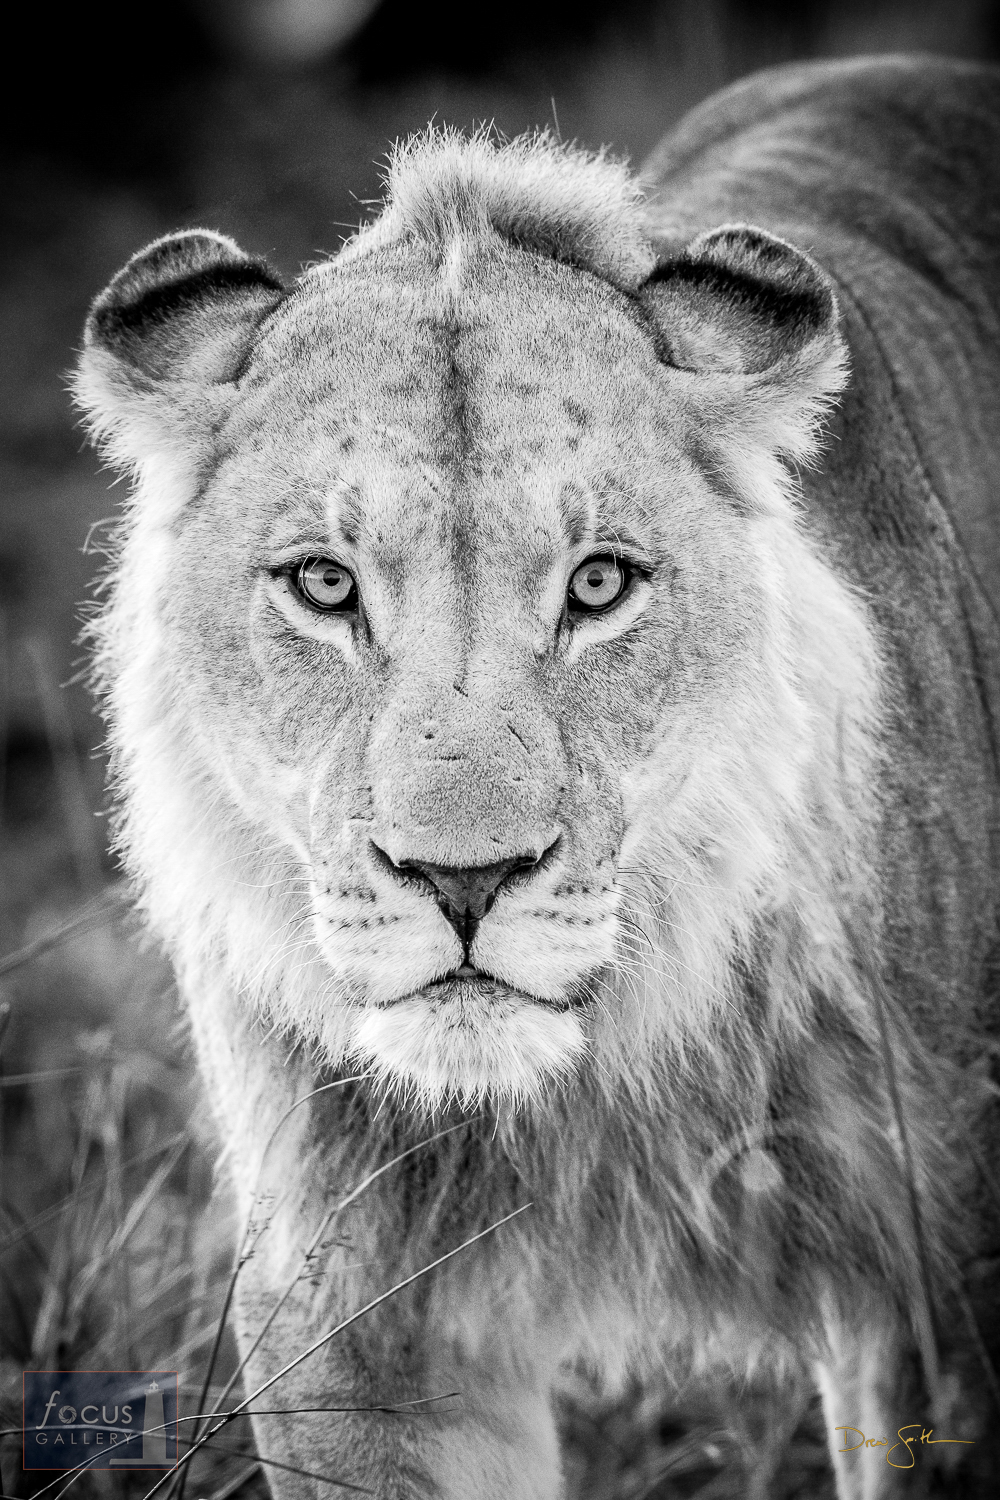 On our last morning game drive in Botswana we were treated to a long visit with this young male lion.  We spent over an hour...